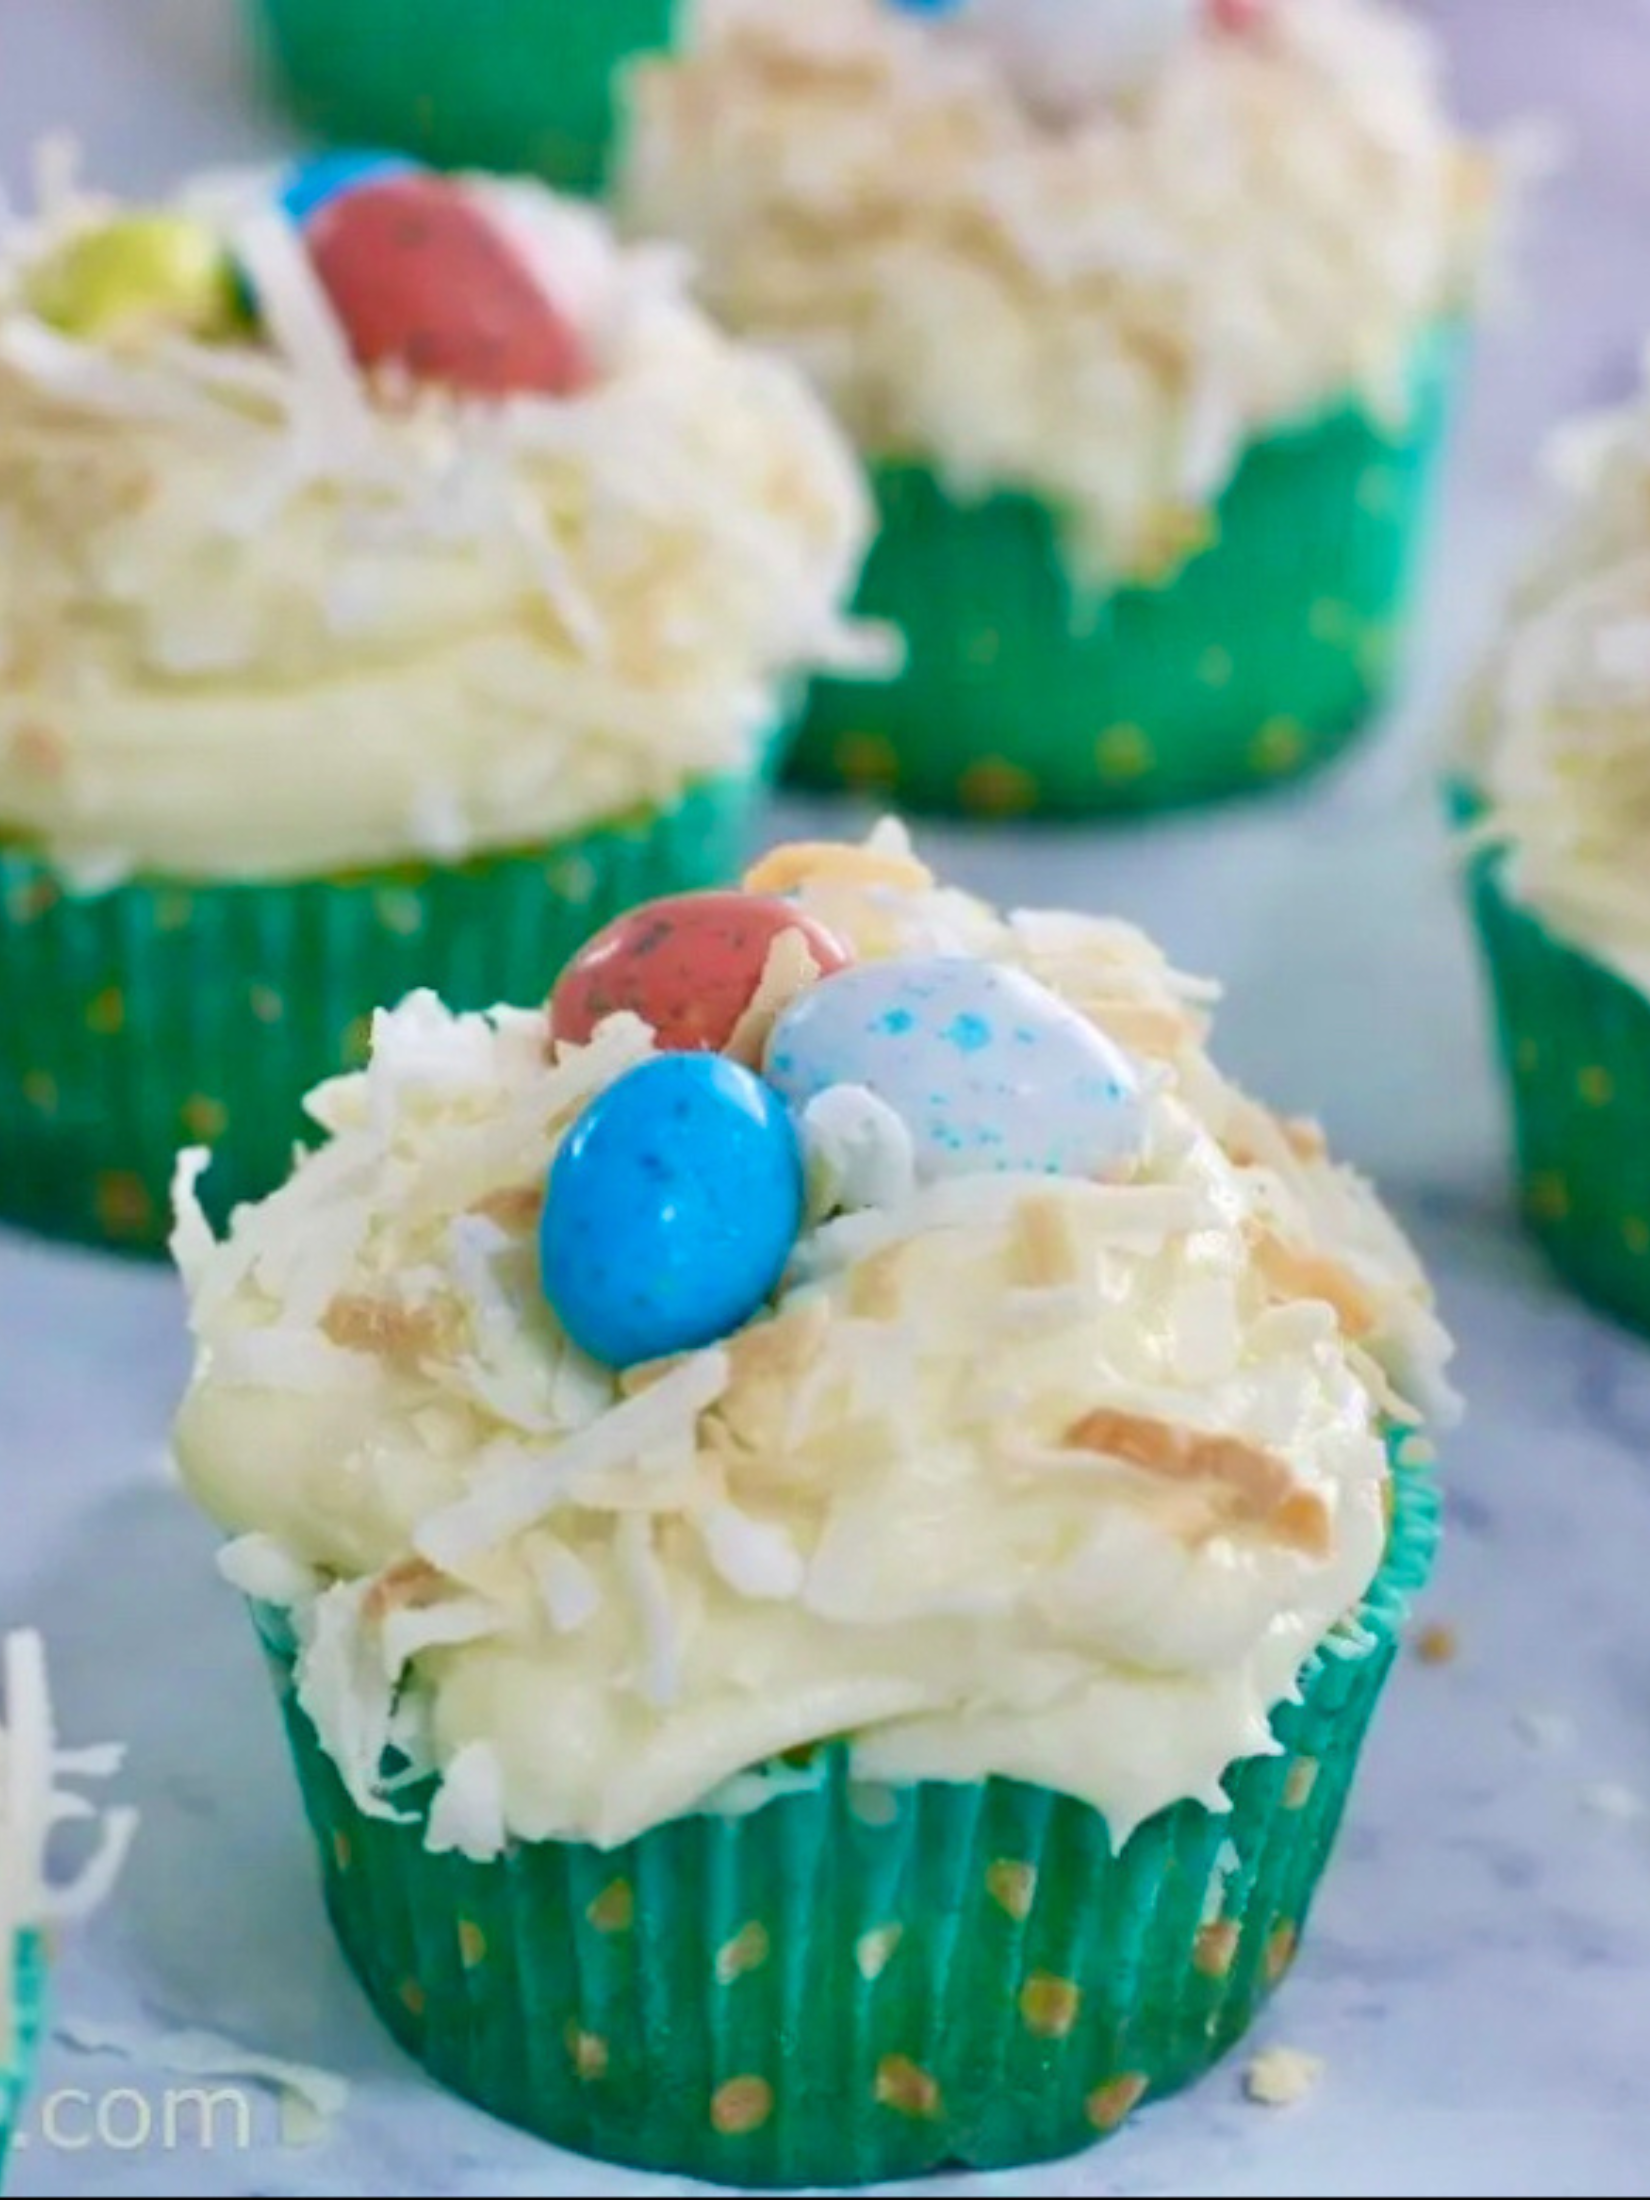 delicious coconut cupcakes topped with creamy coconut frosting, shredded coconut, and some Easter eggs.